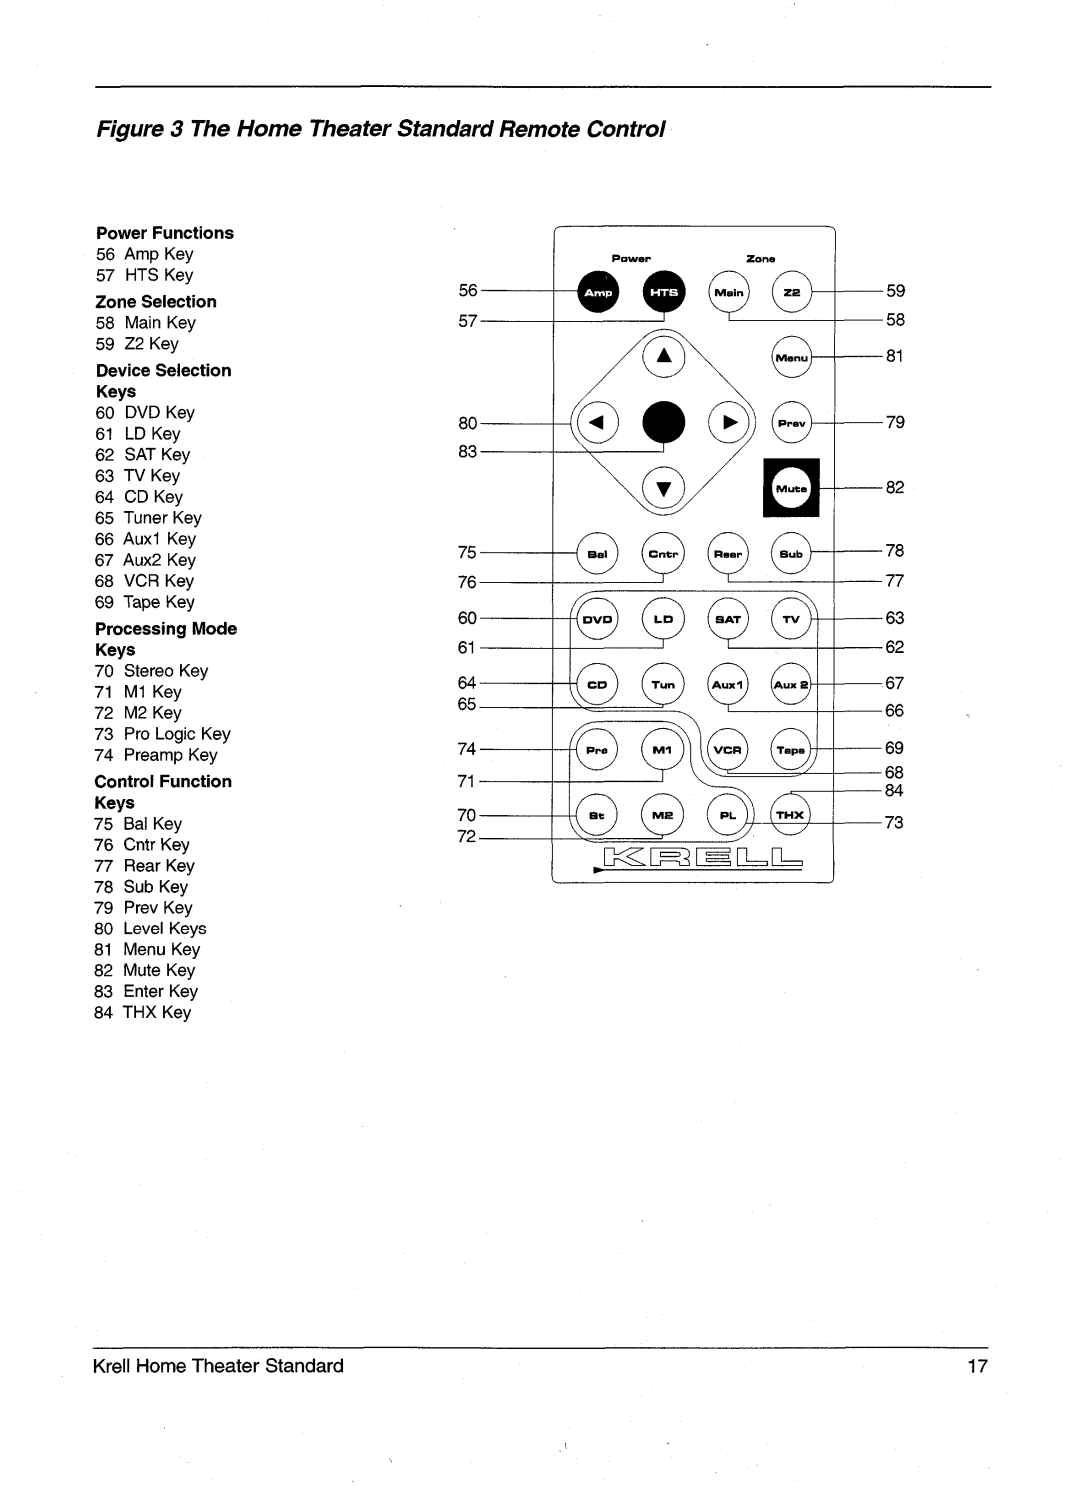 Krell Industries HTS 2 manual The HomeTheater Standard RemoteControl, PowerFunctions, ZoneSelection, DeviceSelection Keys 